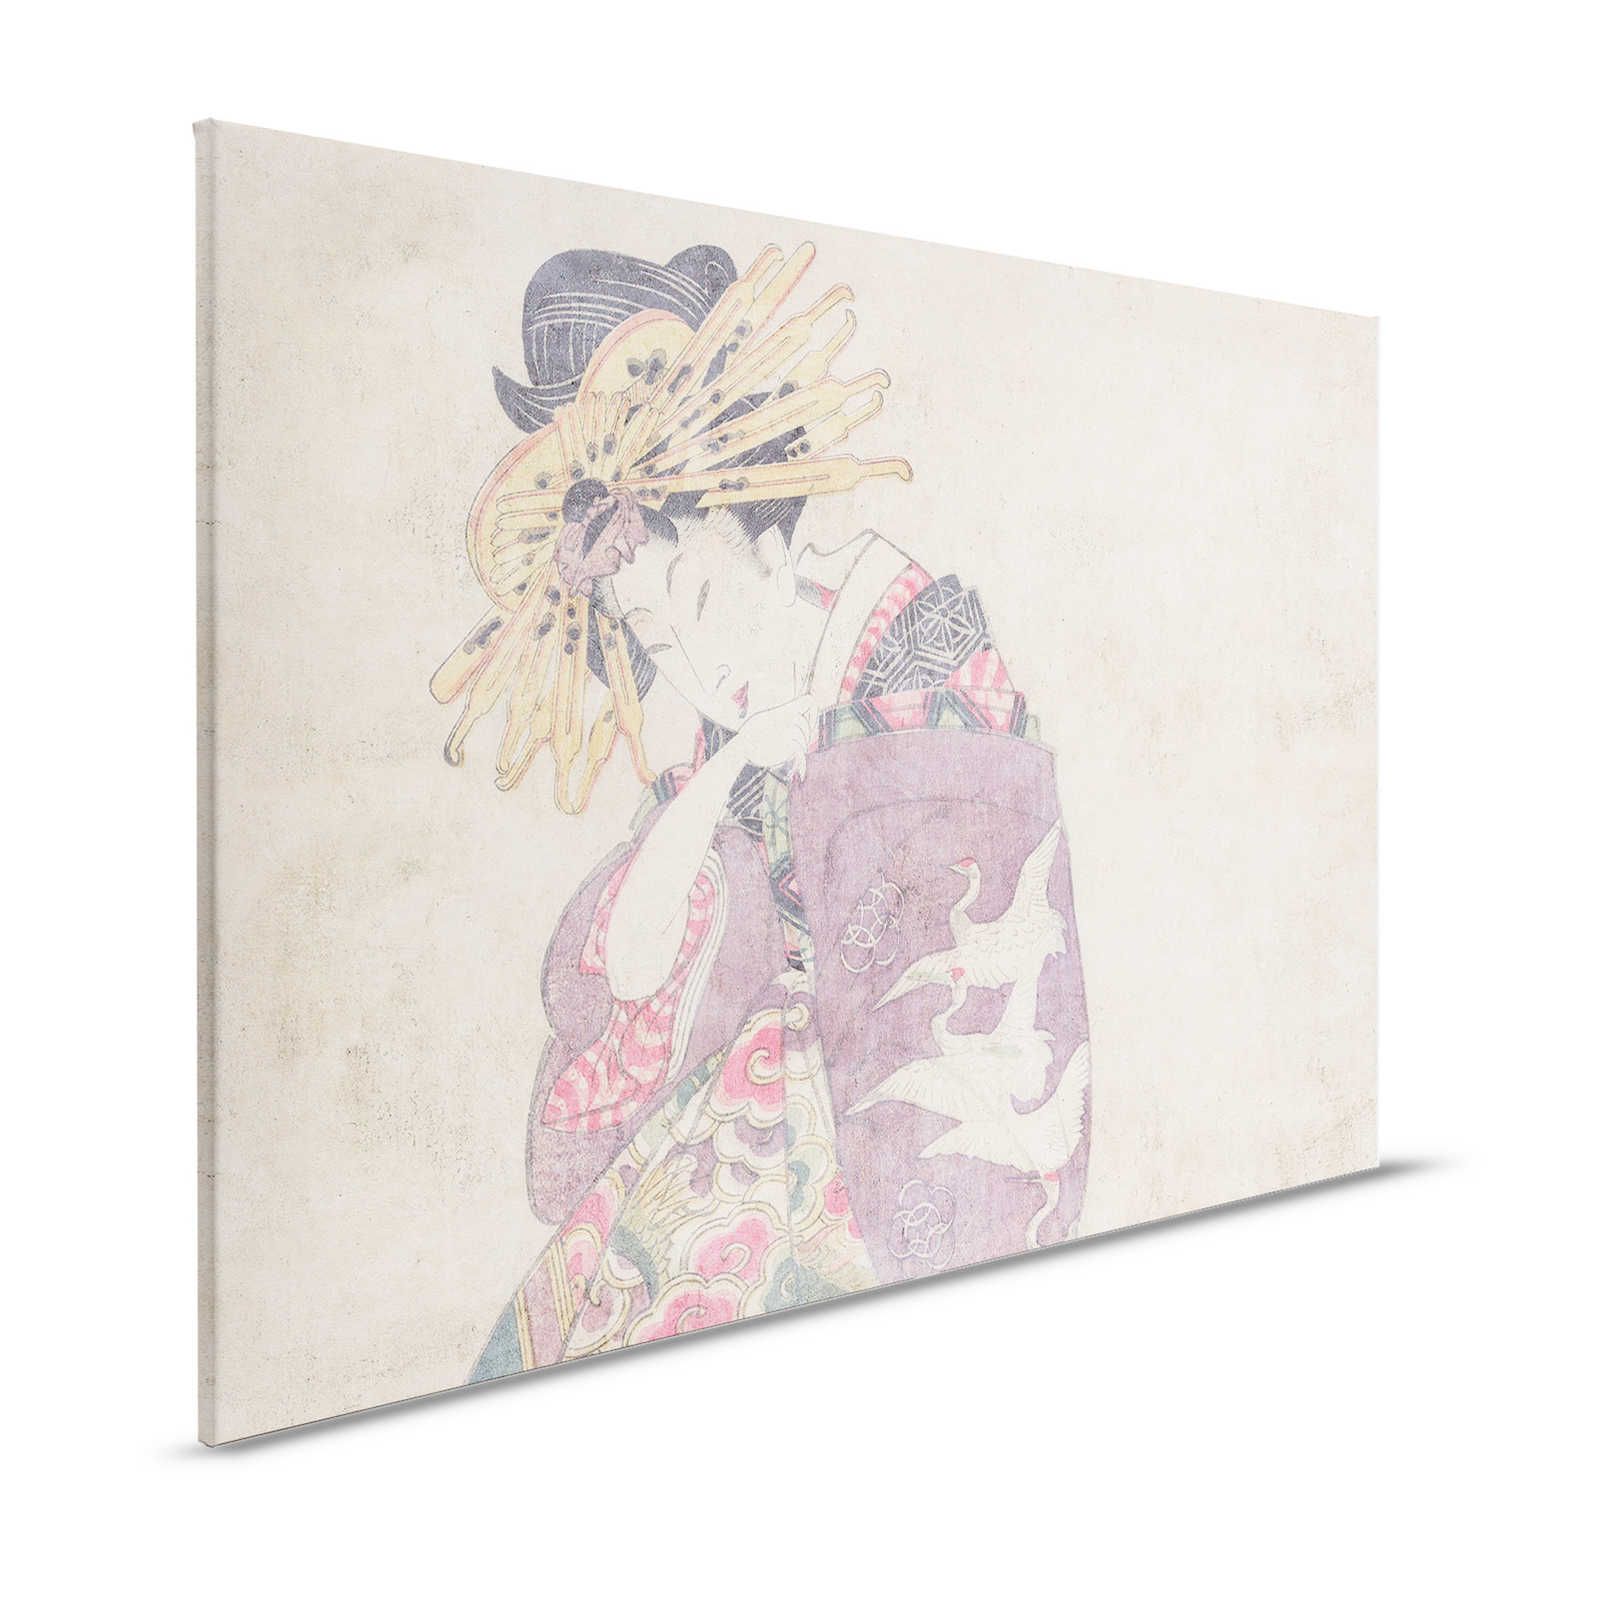 Osaka 1 - Art print canvas picture Asian Dekor in vintage style - 1,20 m x 0,80 m
